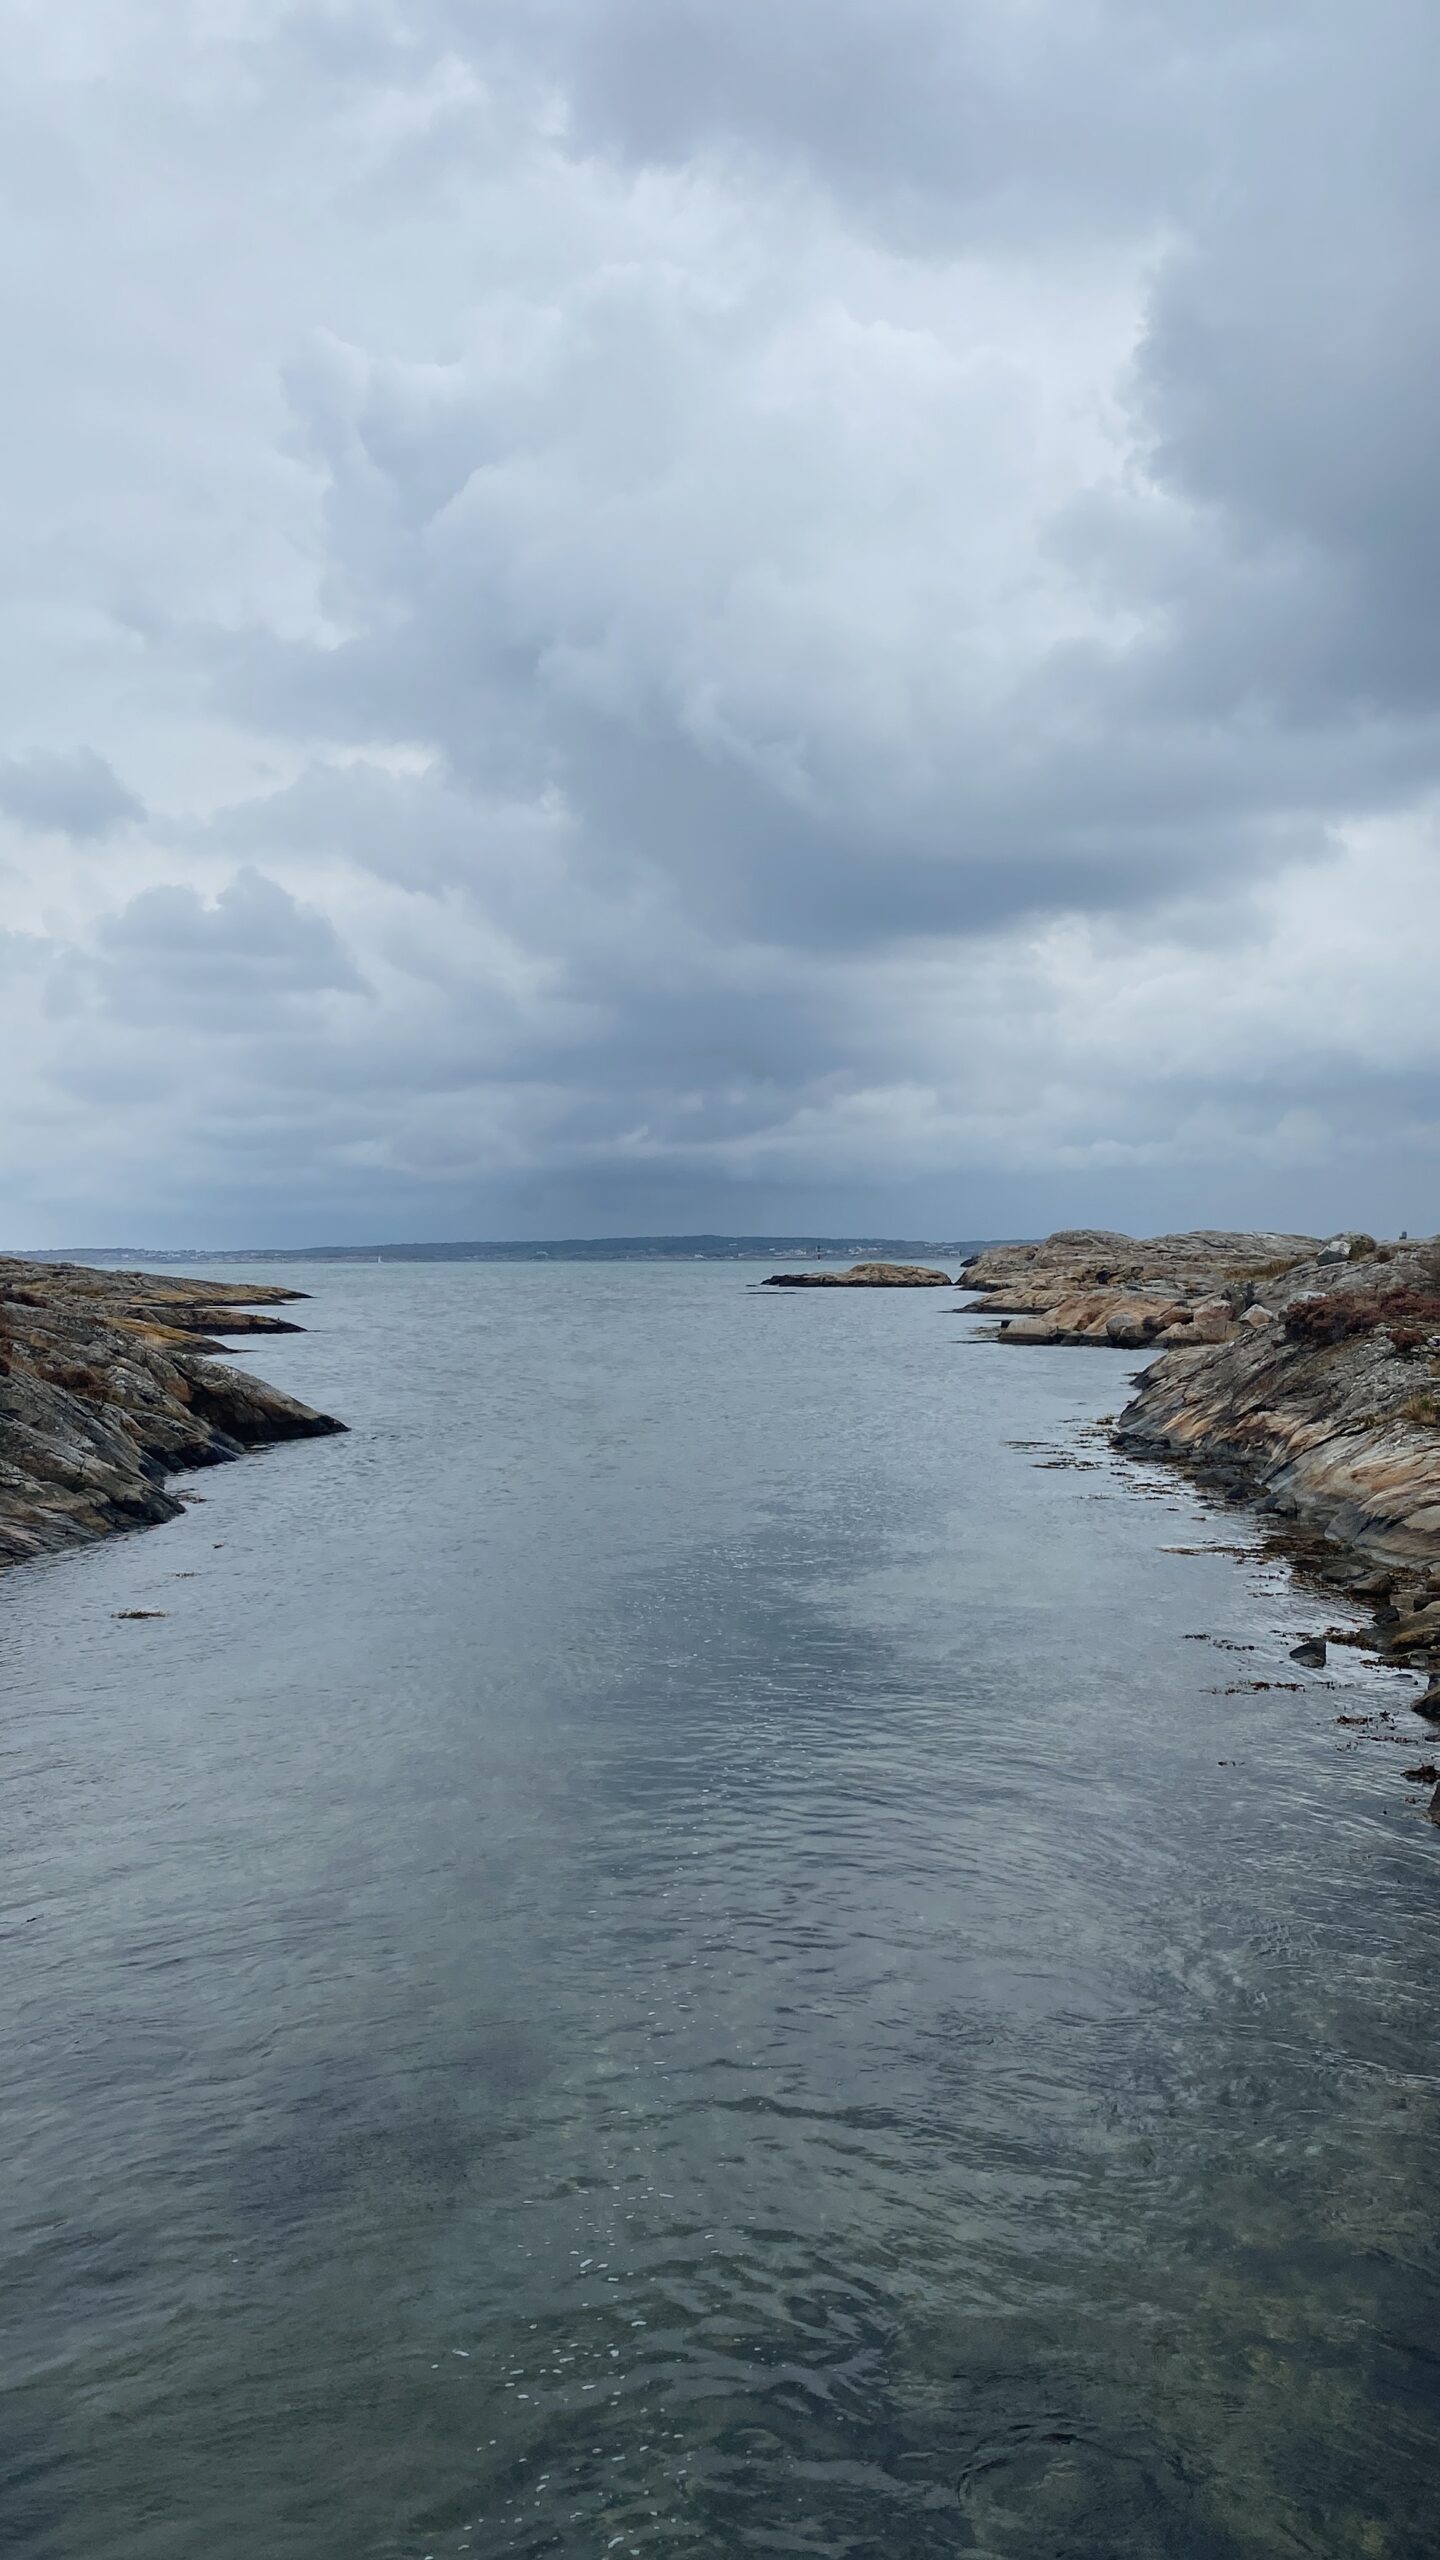 The open water with the edge of Brännö to the right, and Galterö to the left